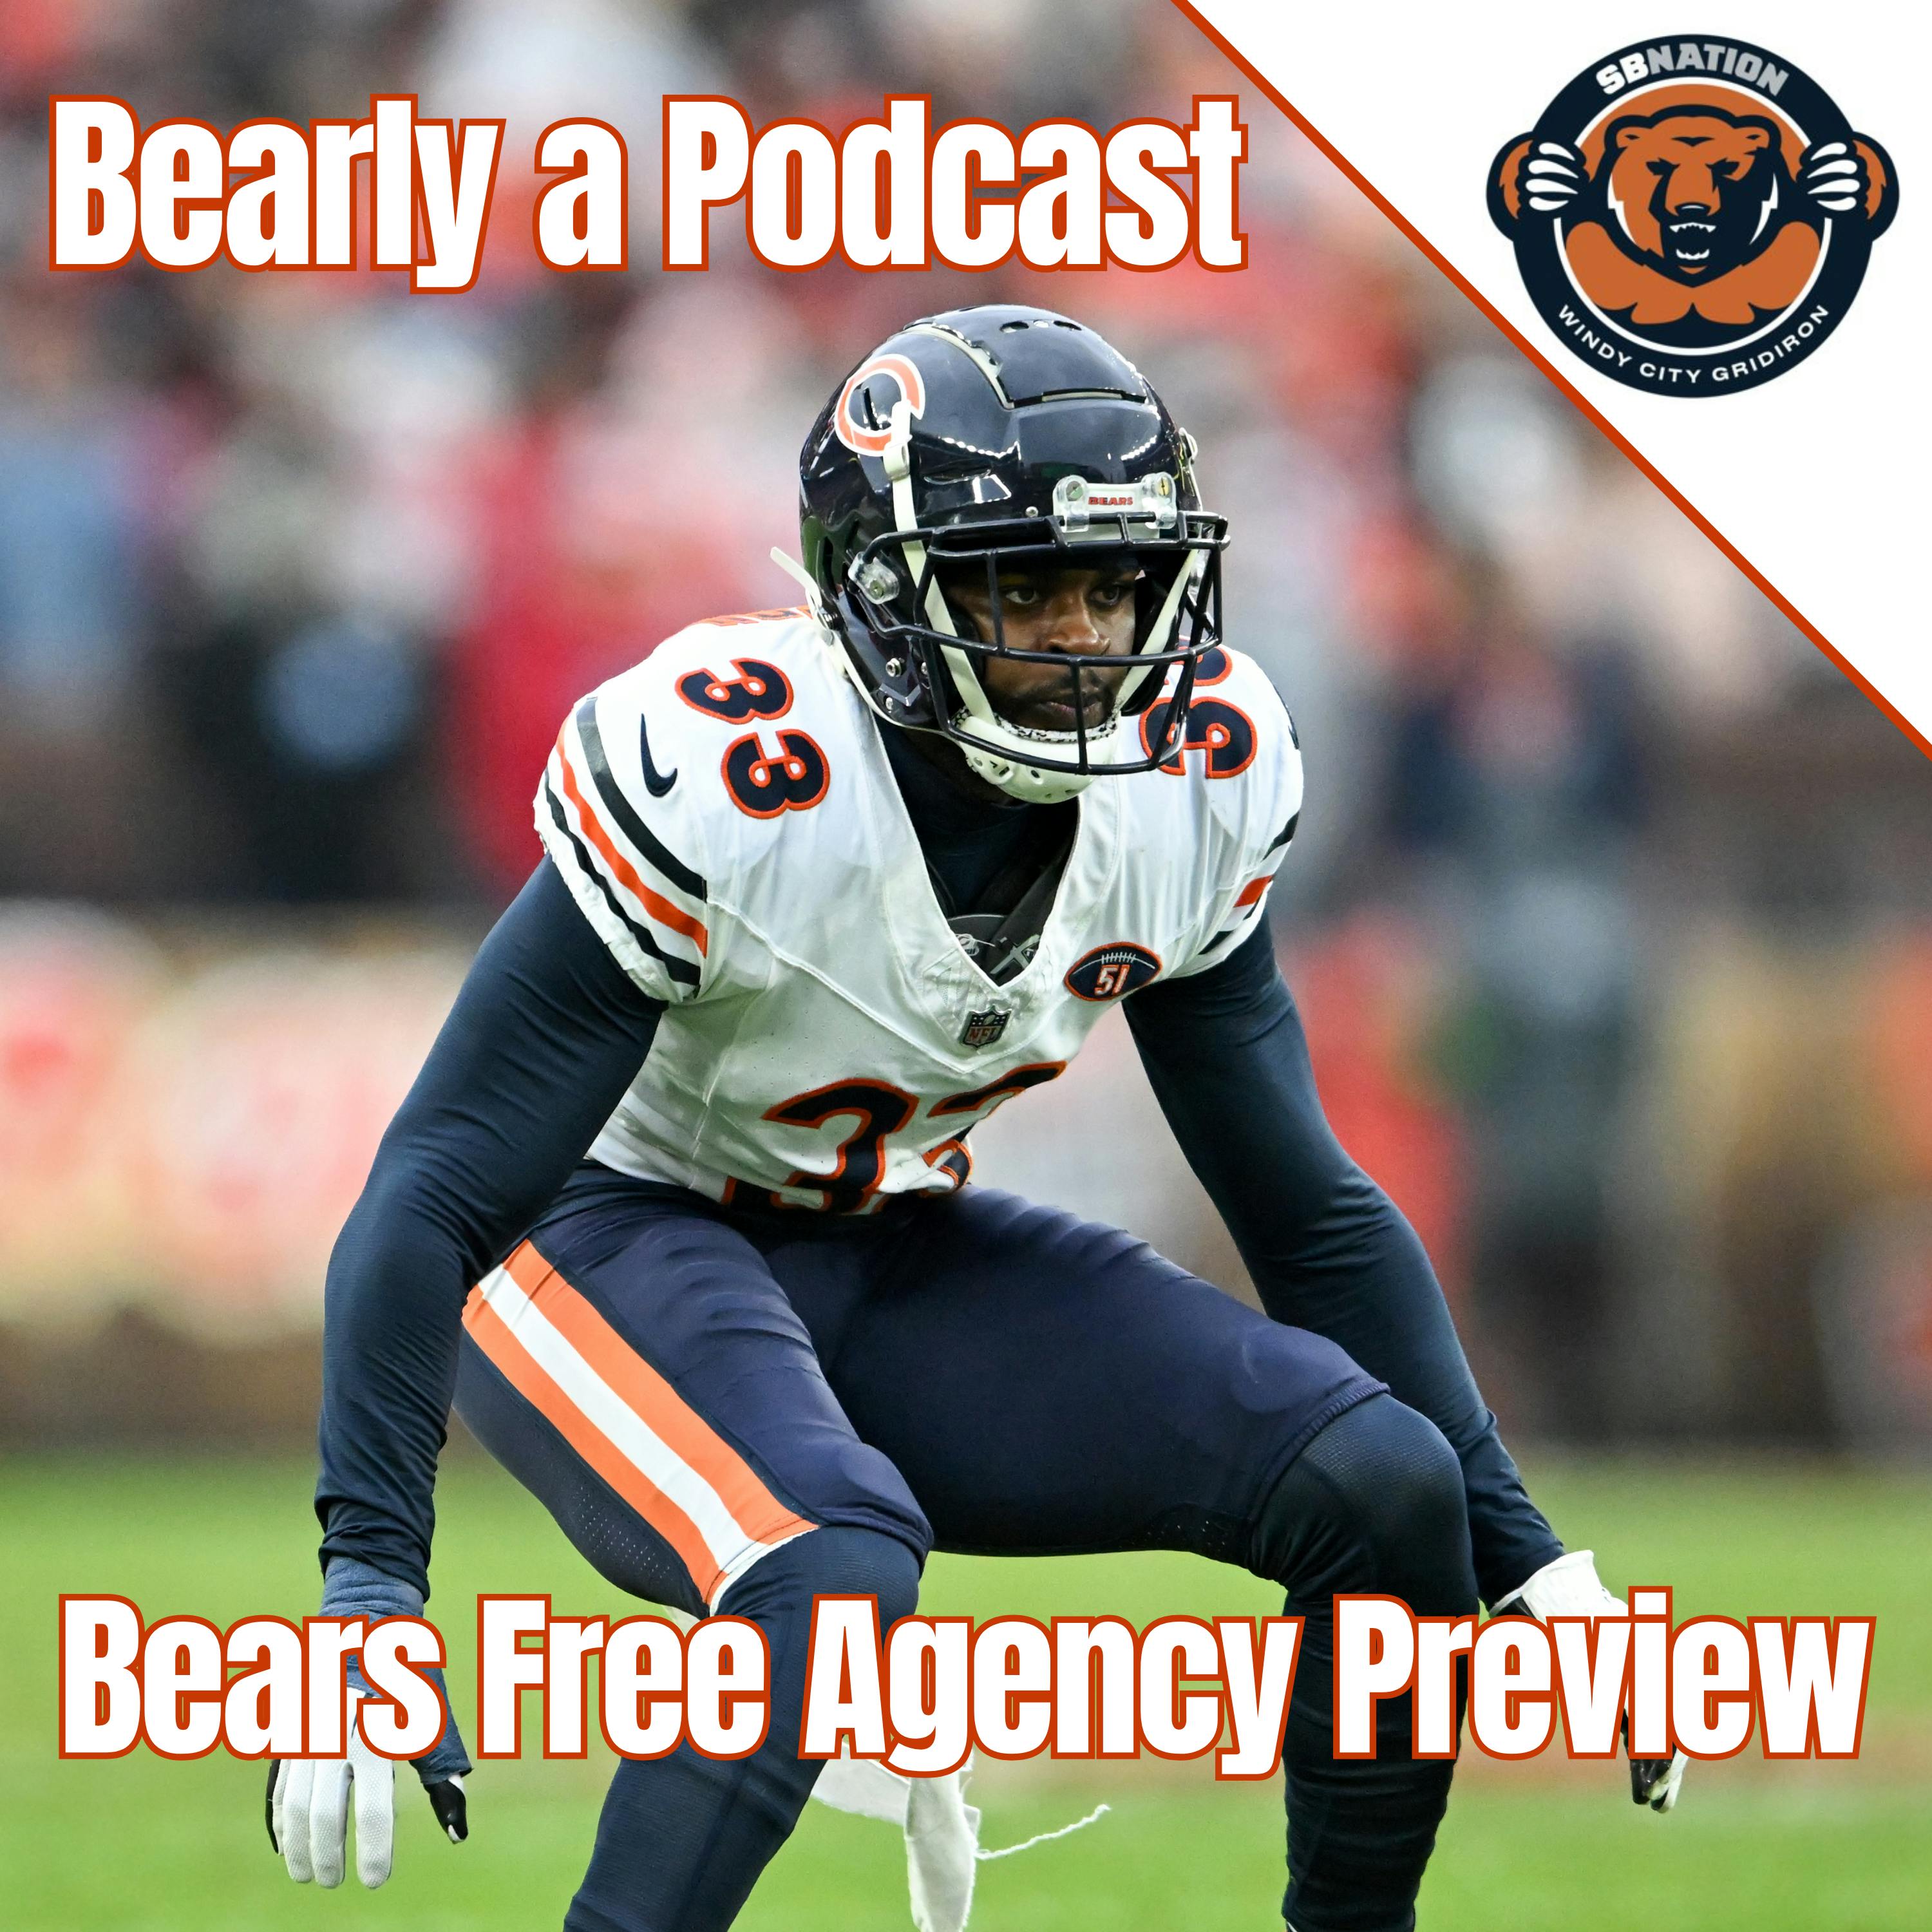 Bearly a Podcast: Jaylon Johnson Extended, plus Free Agency Preview!